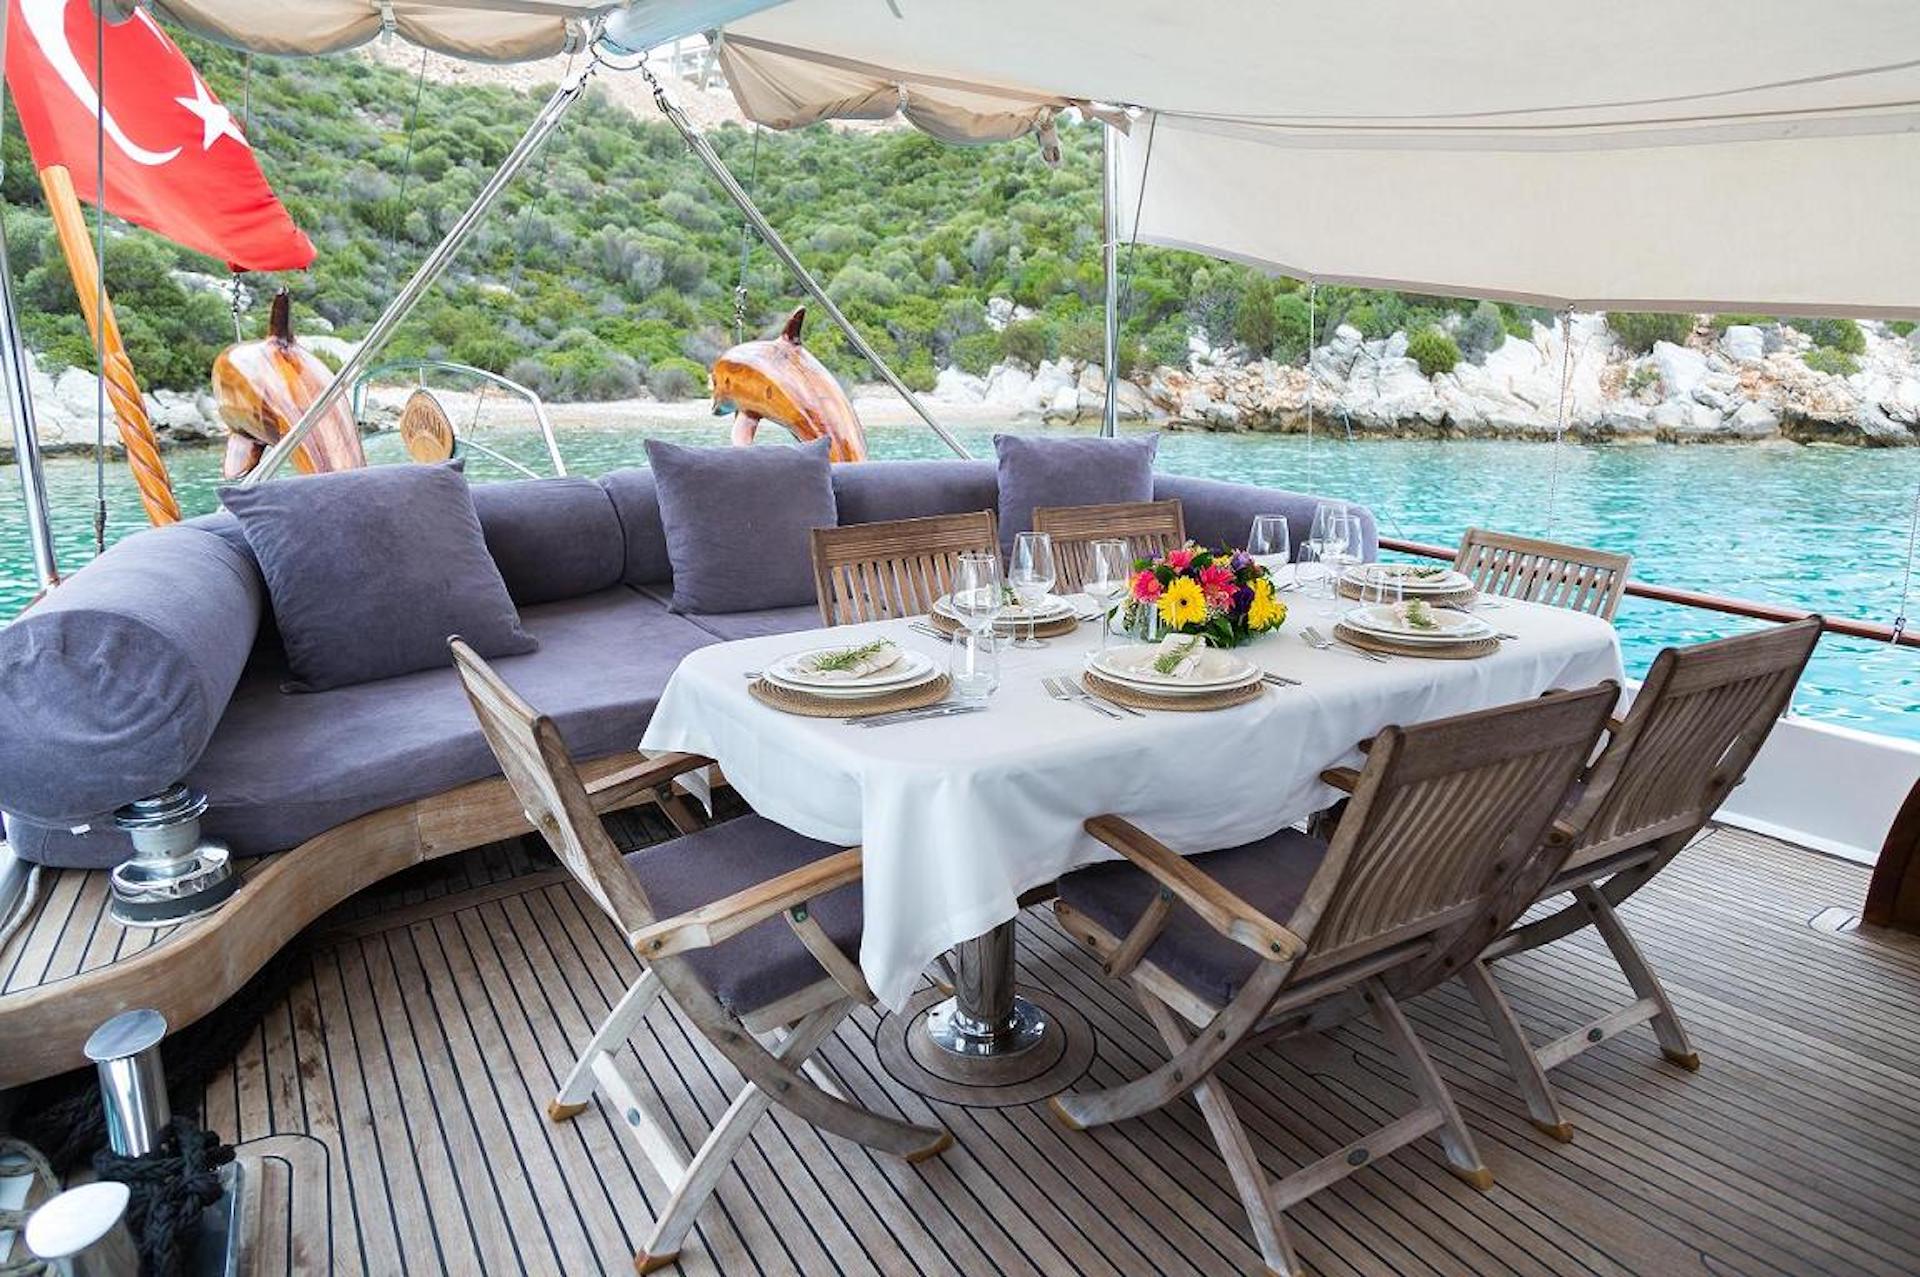 yacht charter Primadonna deck dining area